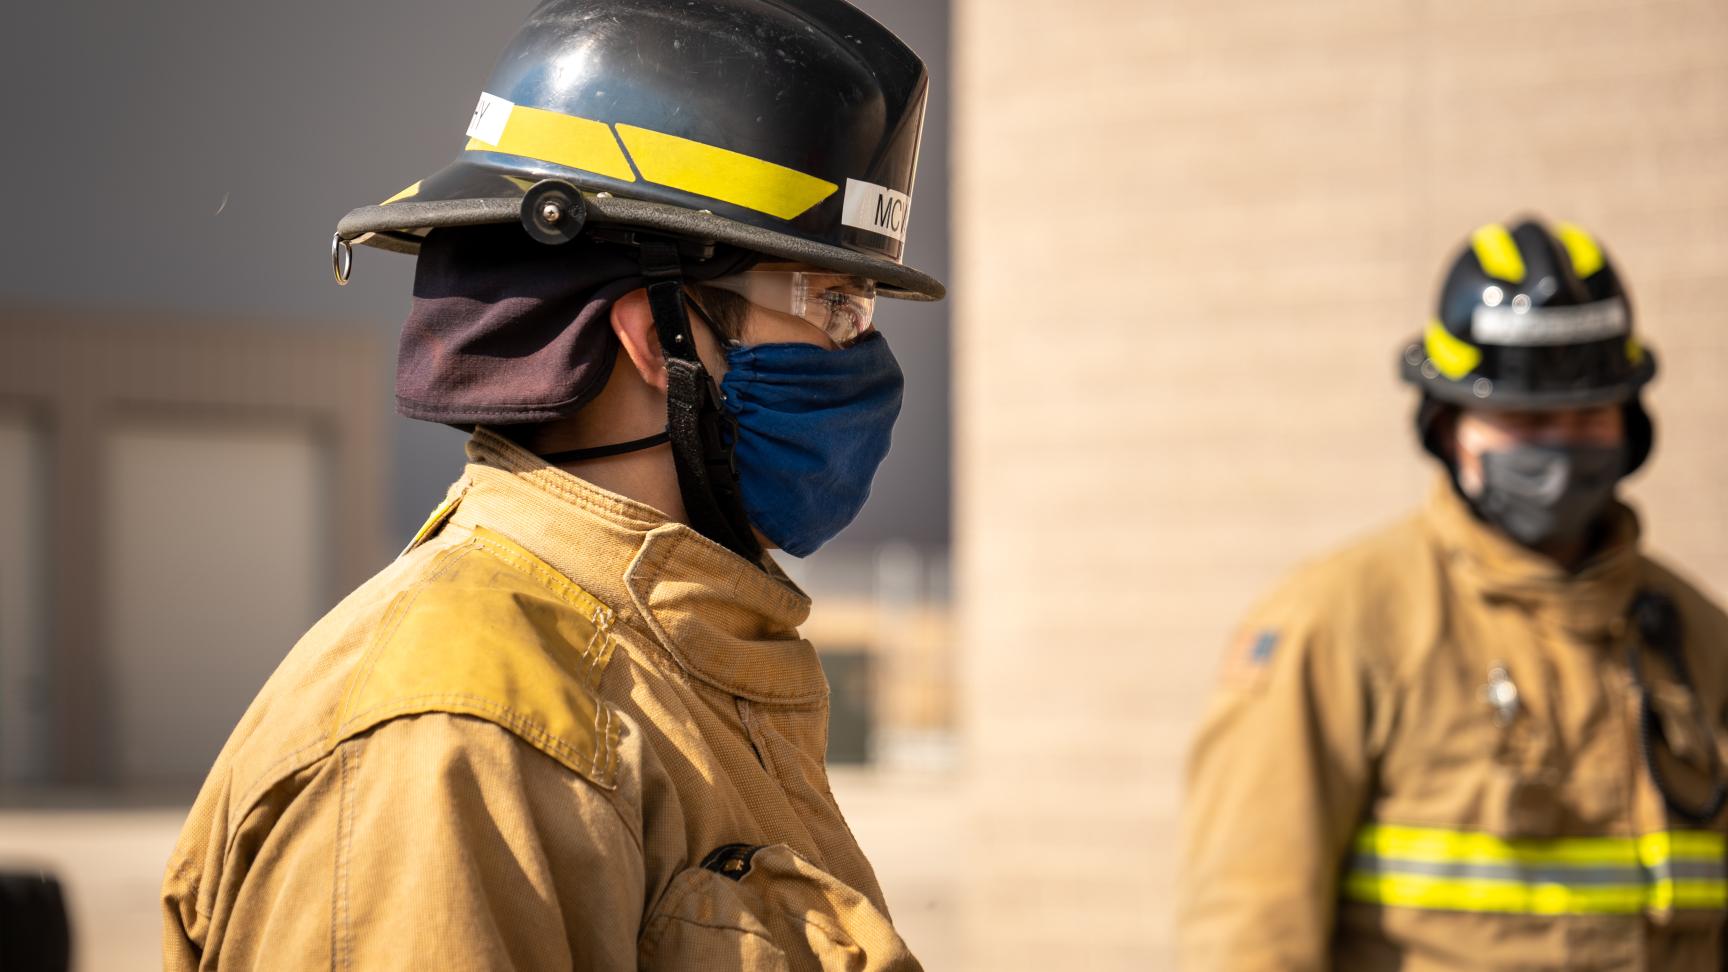 Fire science students training